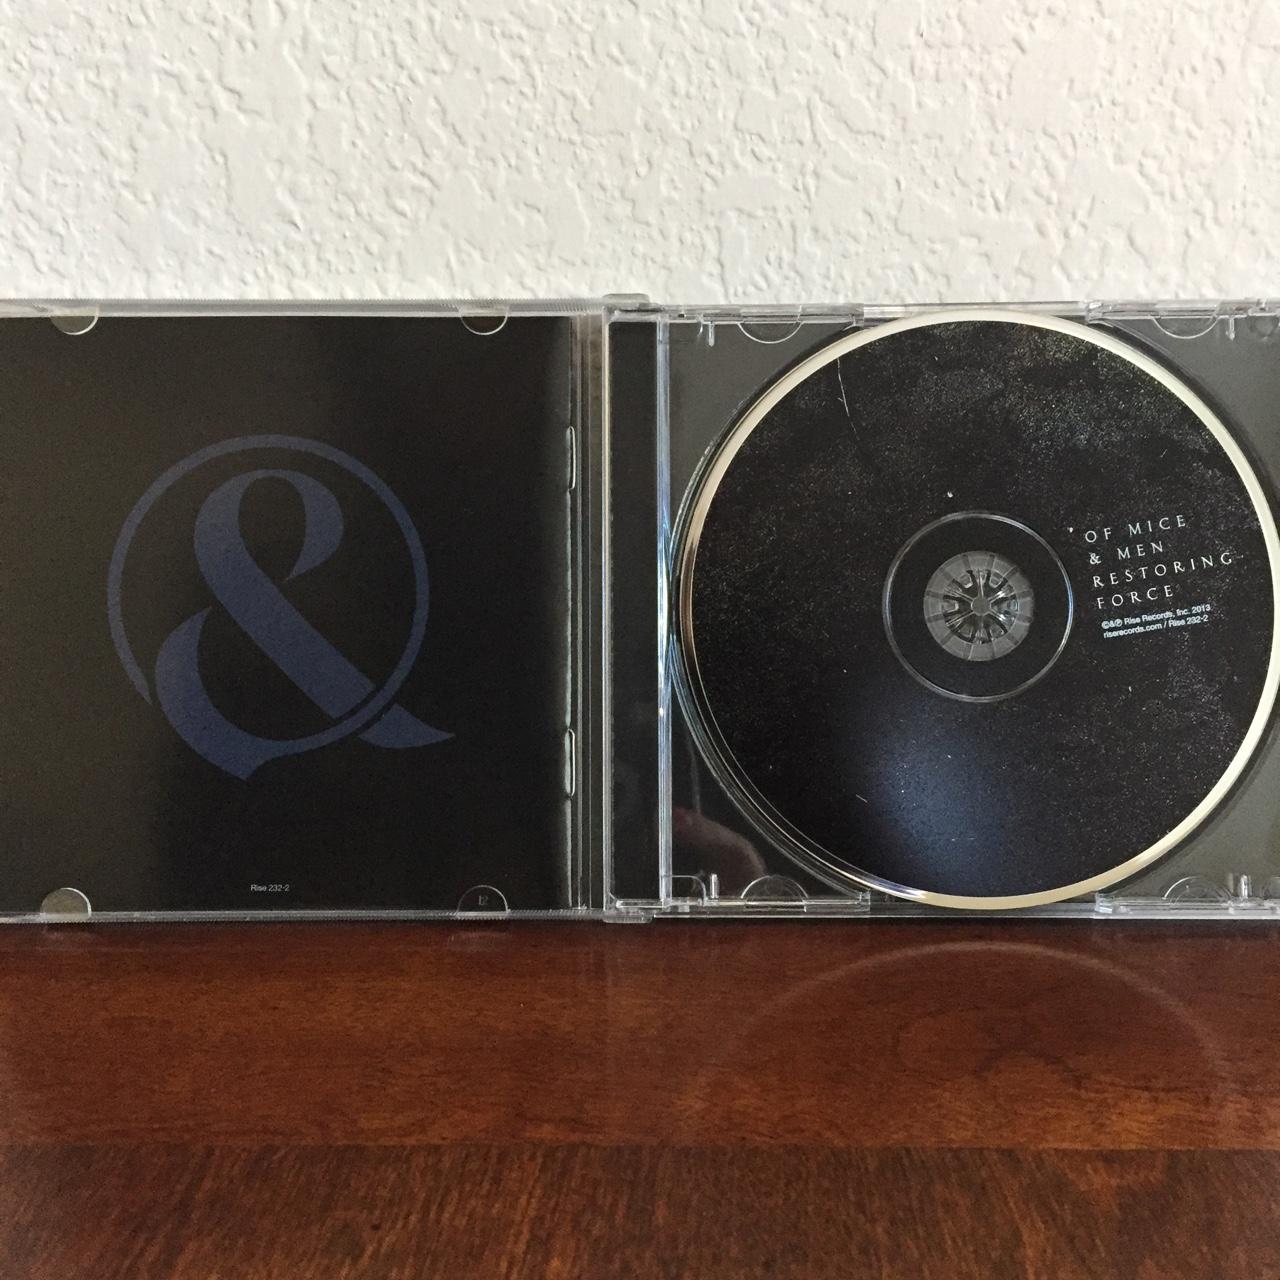 of mice and men restoring force